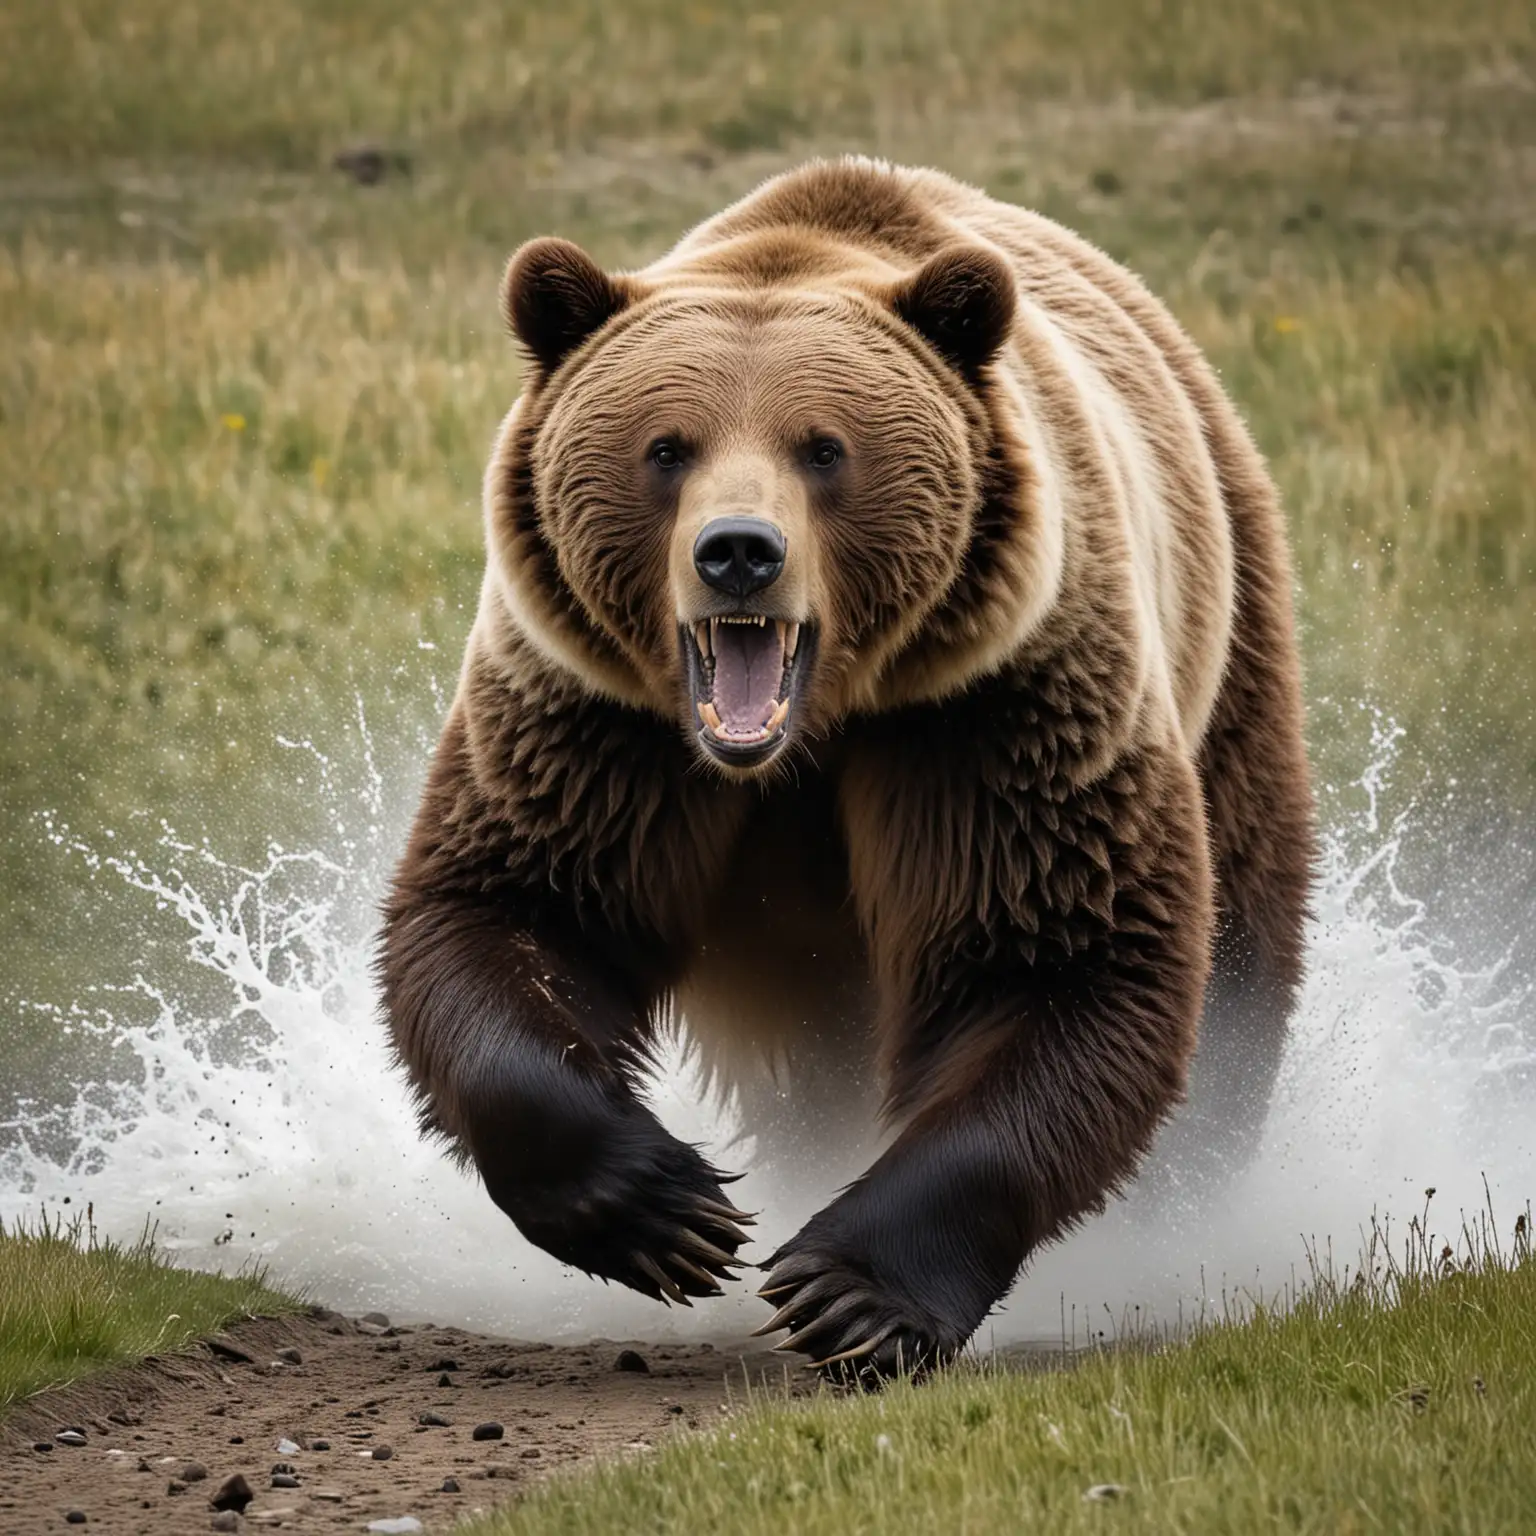 grizzly bear attacking
